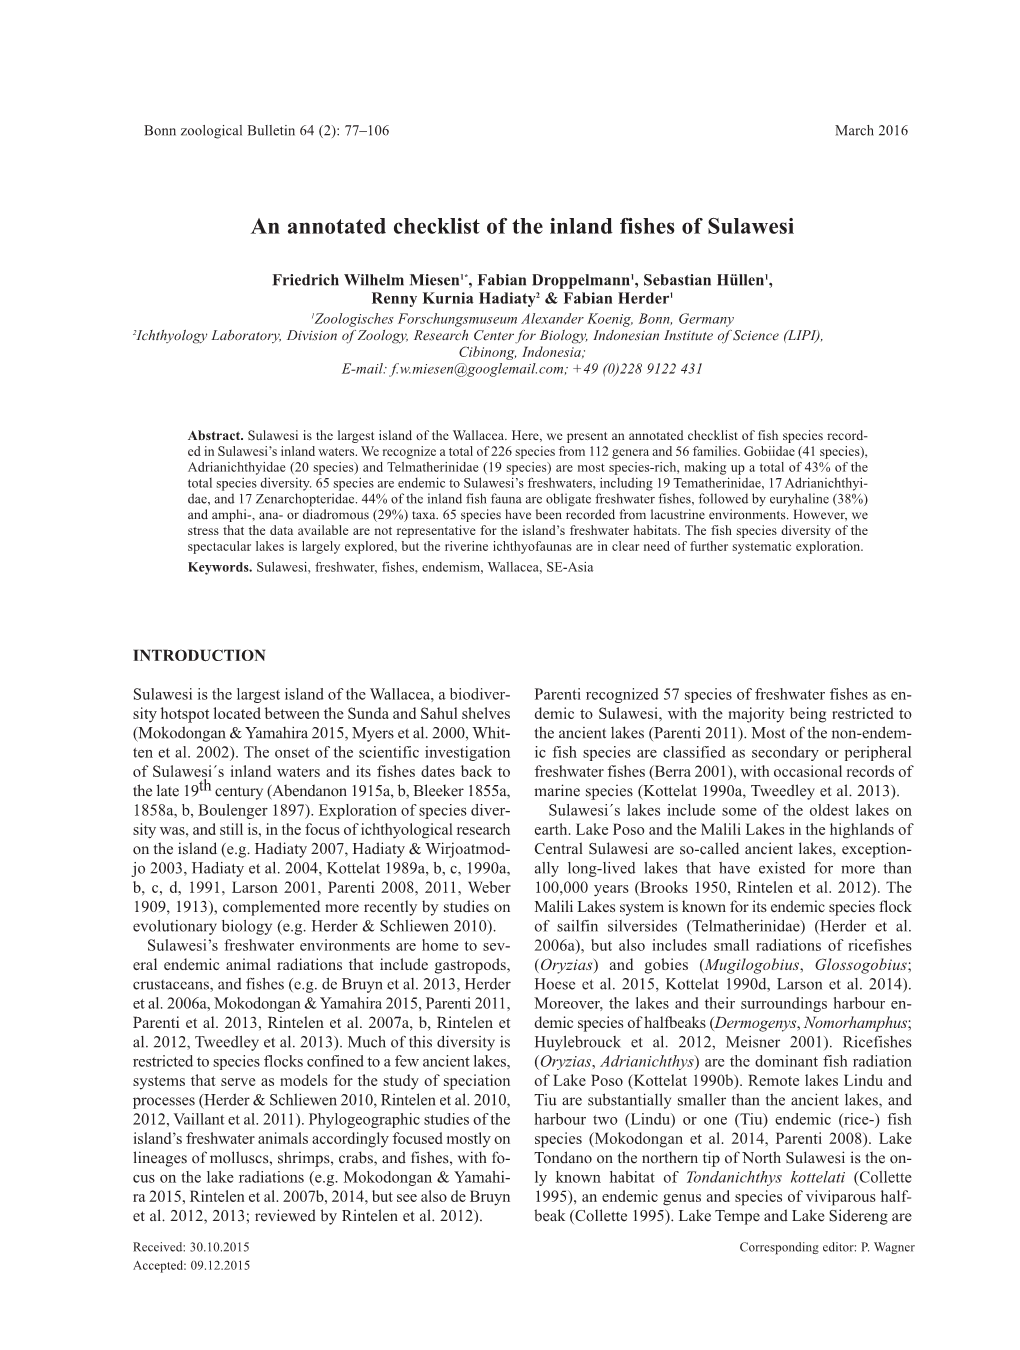 An Annotated Checklist of the Inland Fishes of Sulawesi